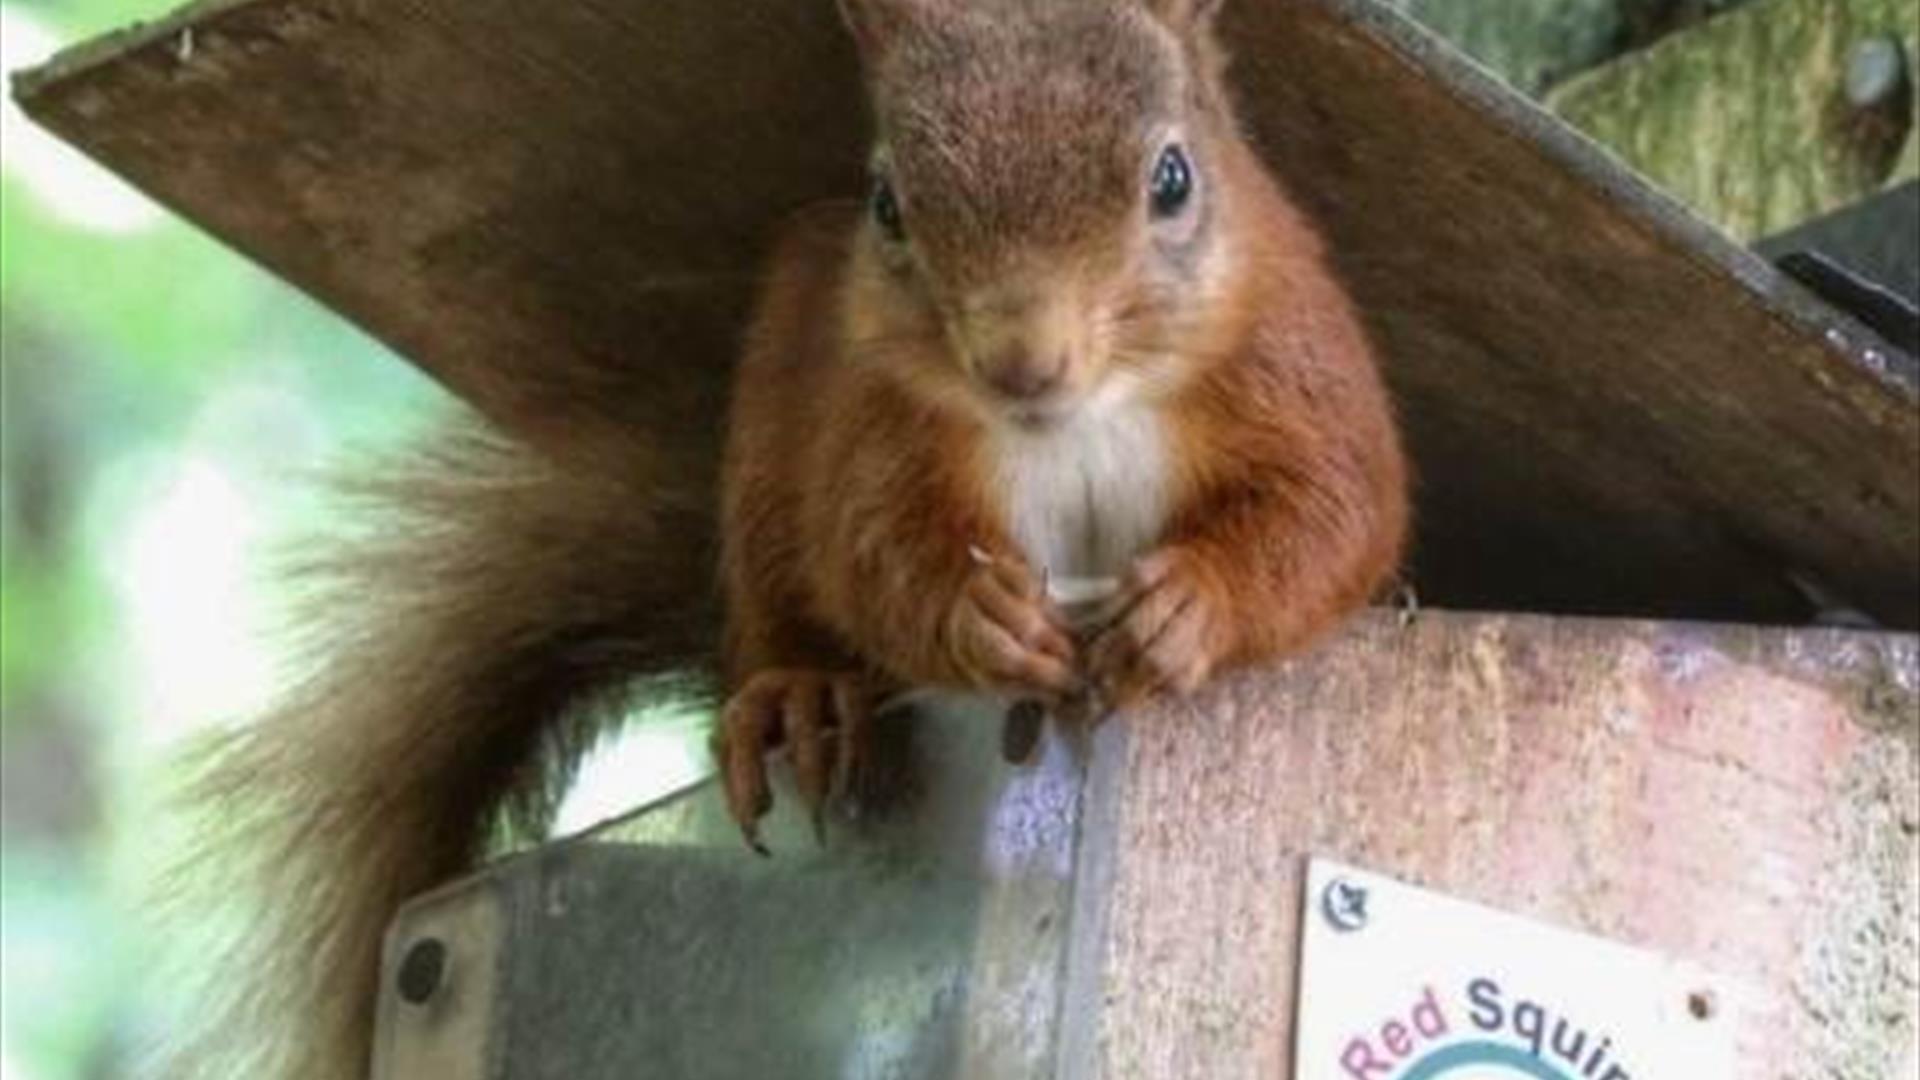 a red squirrel eating feed from a wooden box with the 'Glens Red Squirrel Group' logo on the side